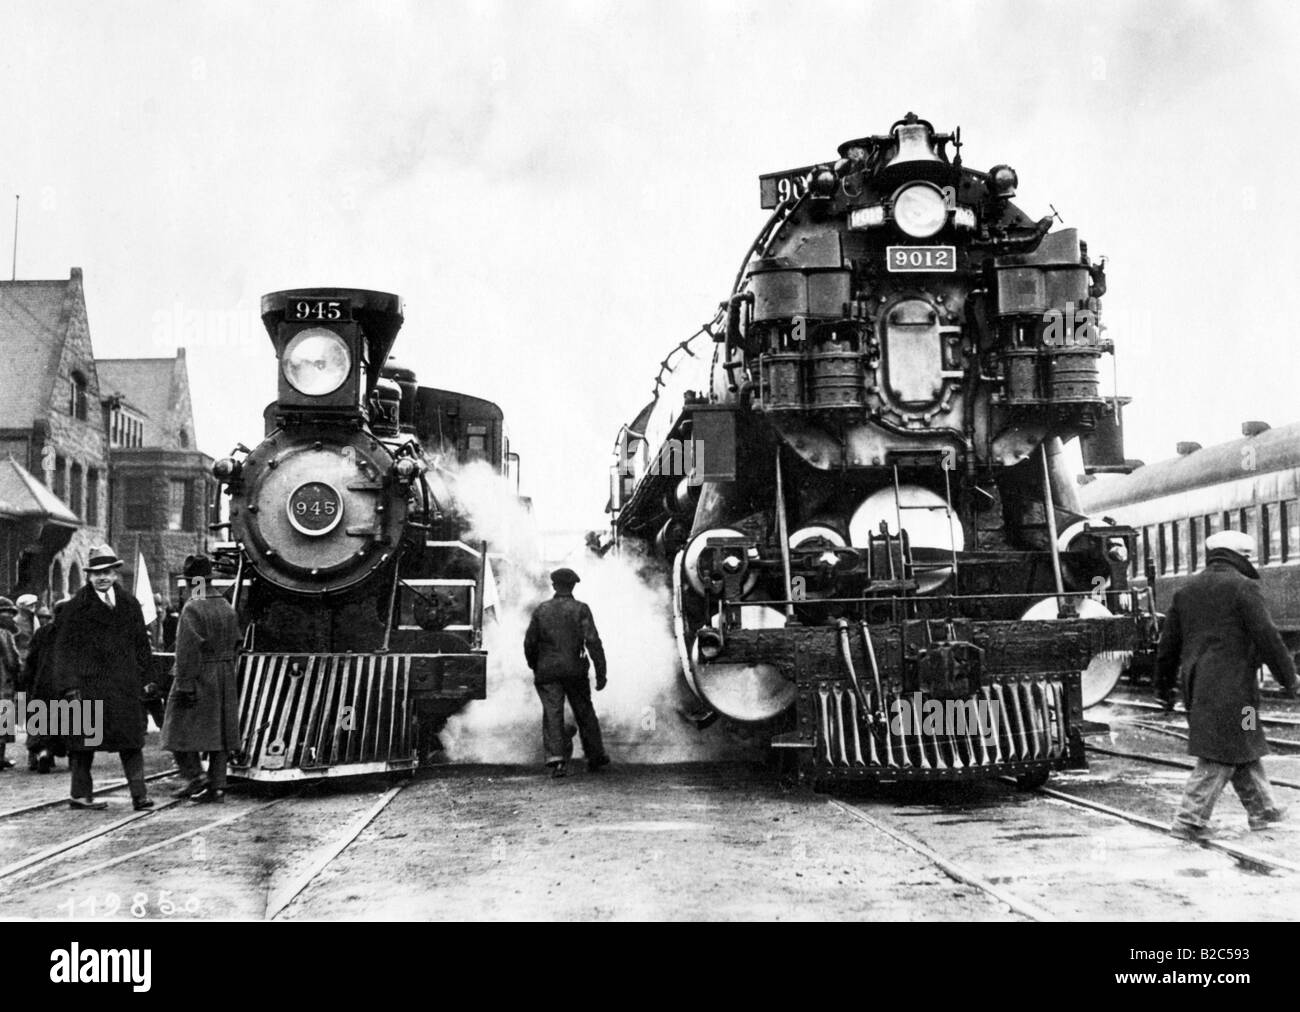 Two steam engines, historical photo, circa 1920 Stock Photo